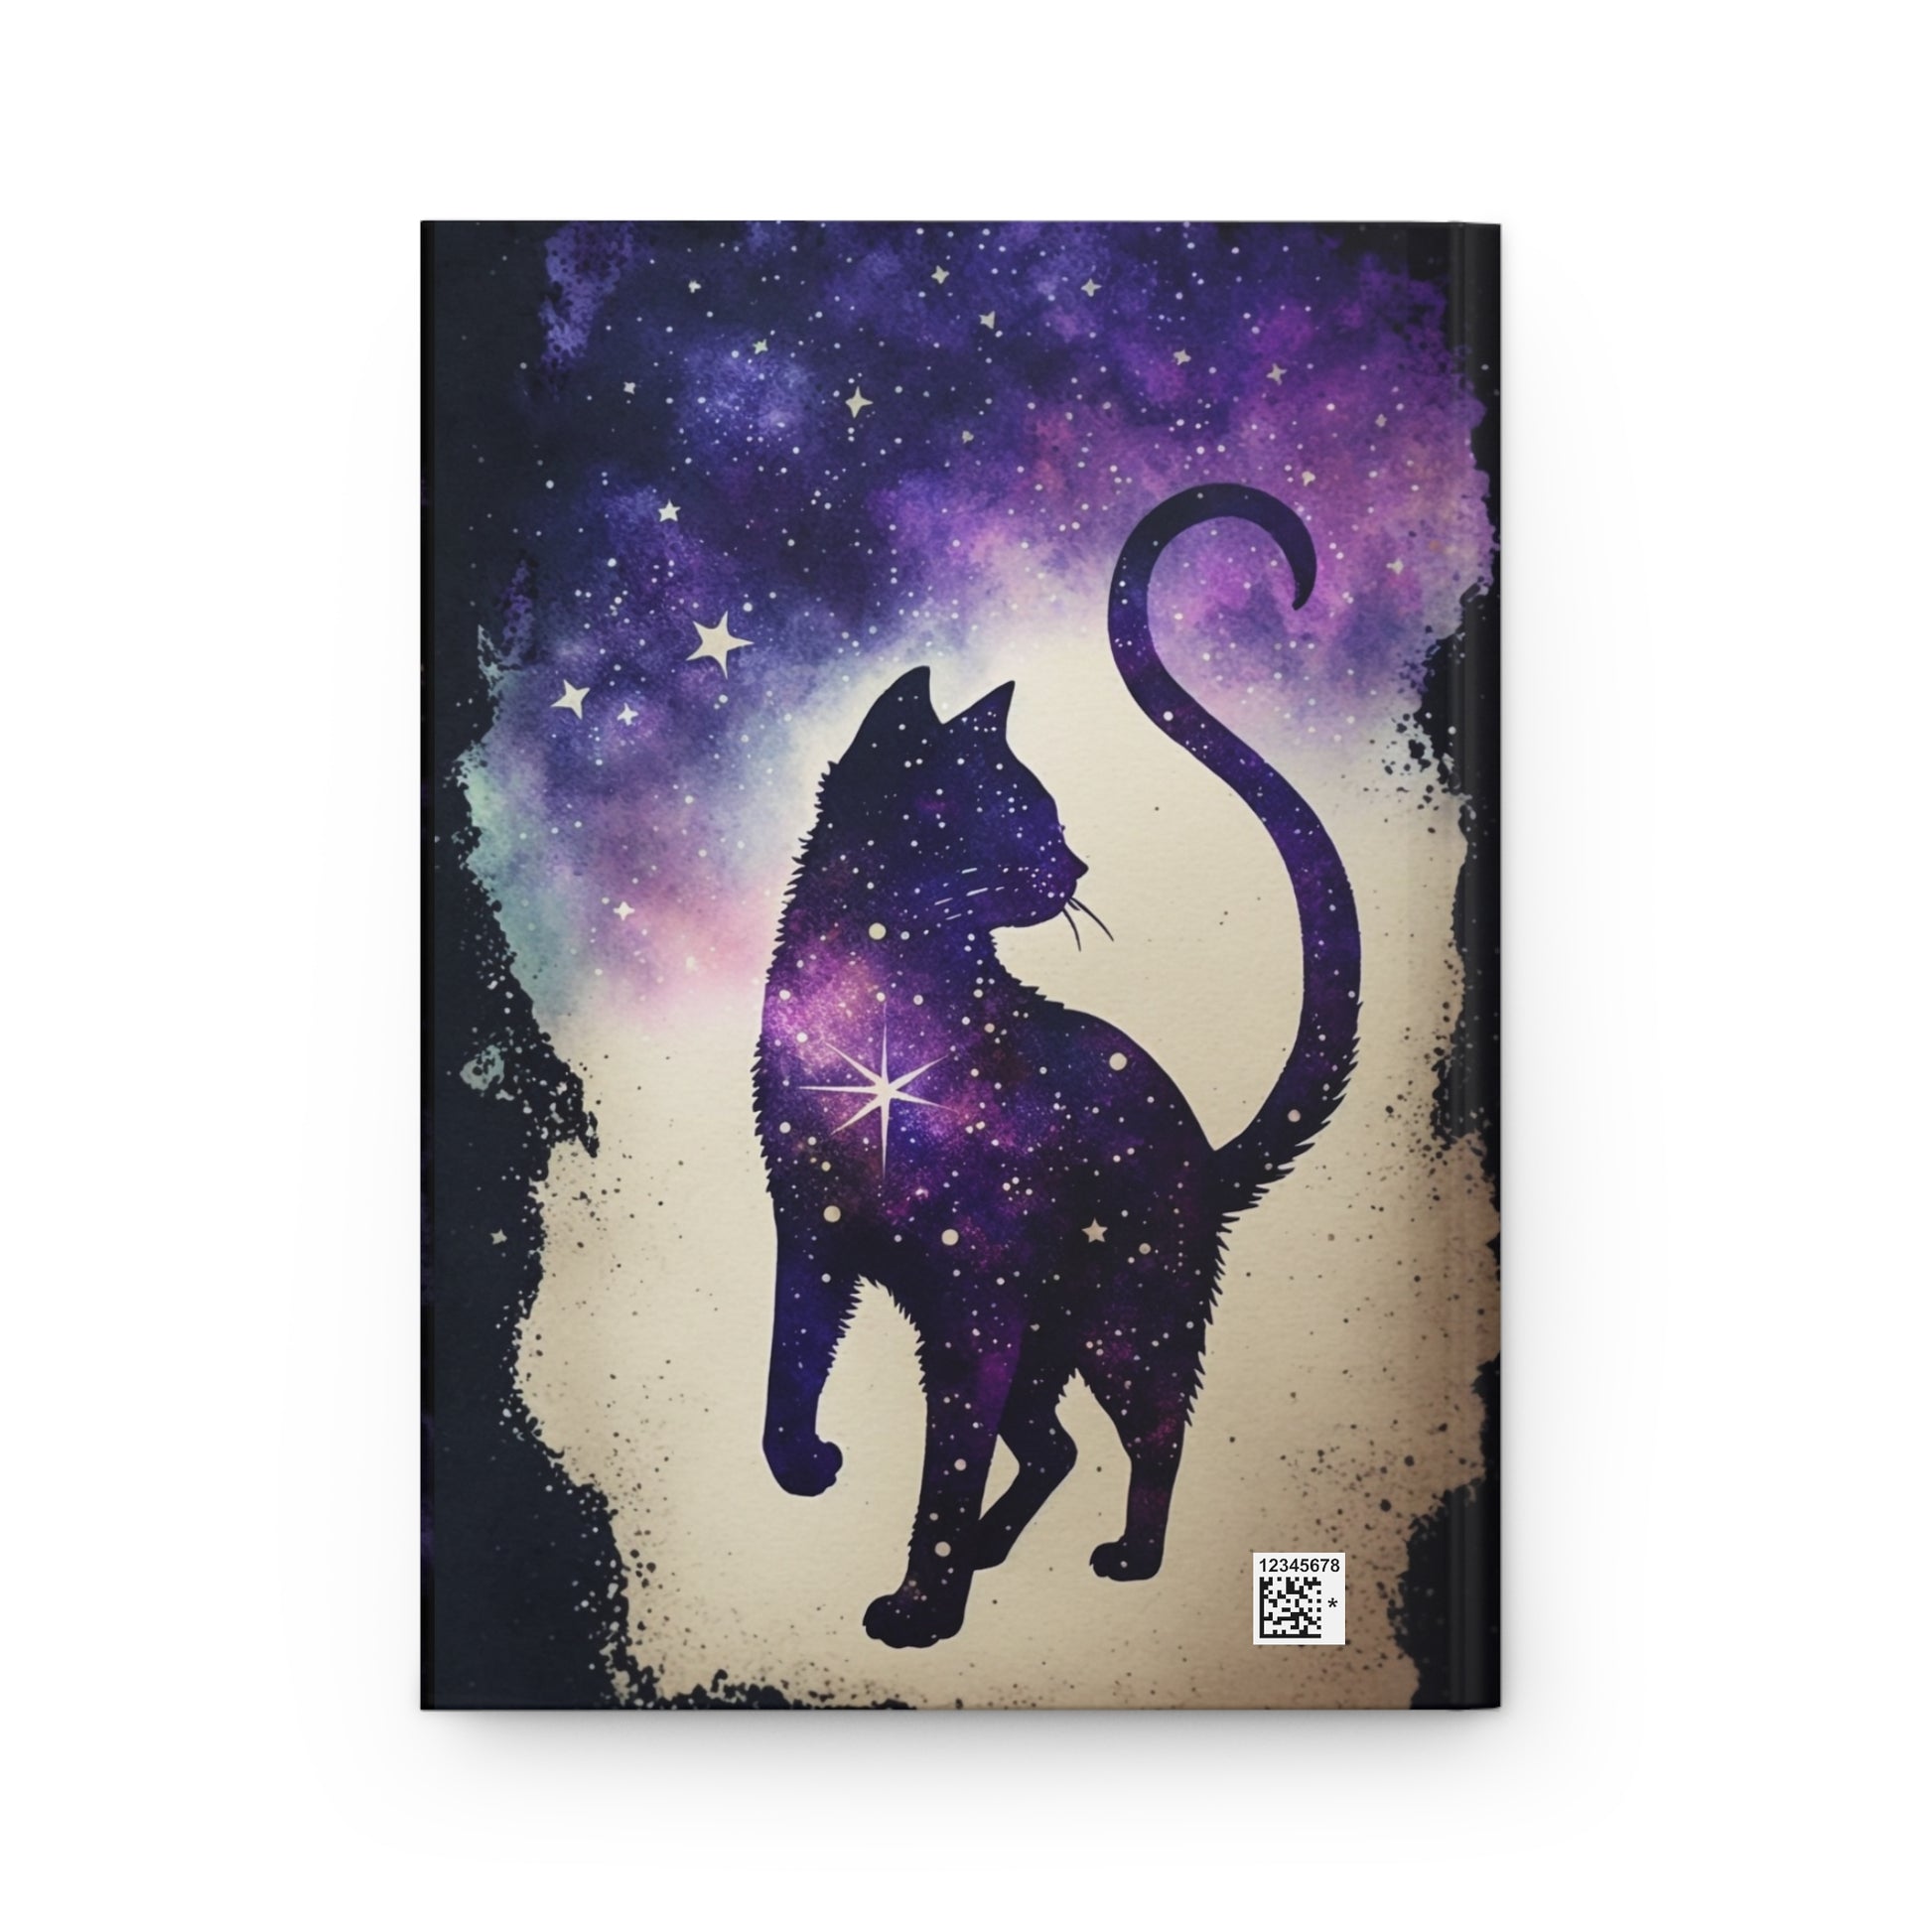 Magic black cat Notebook Witchy Journal-MoonChildWorld